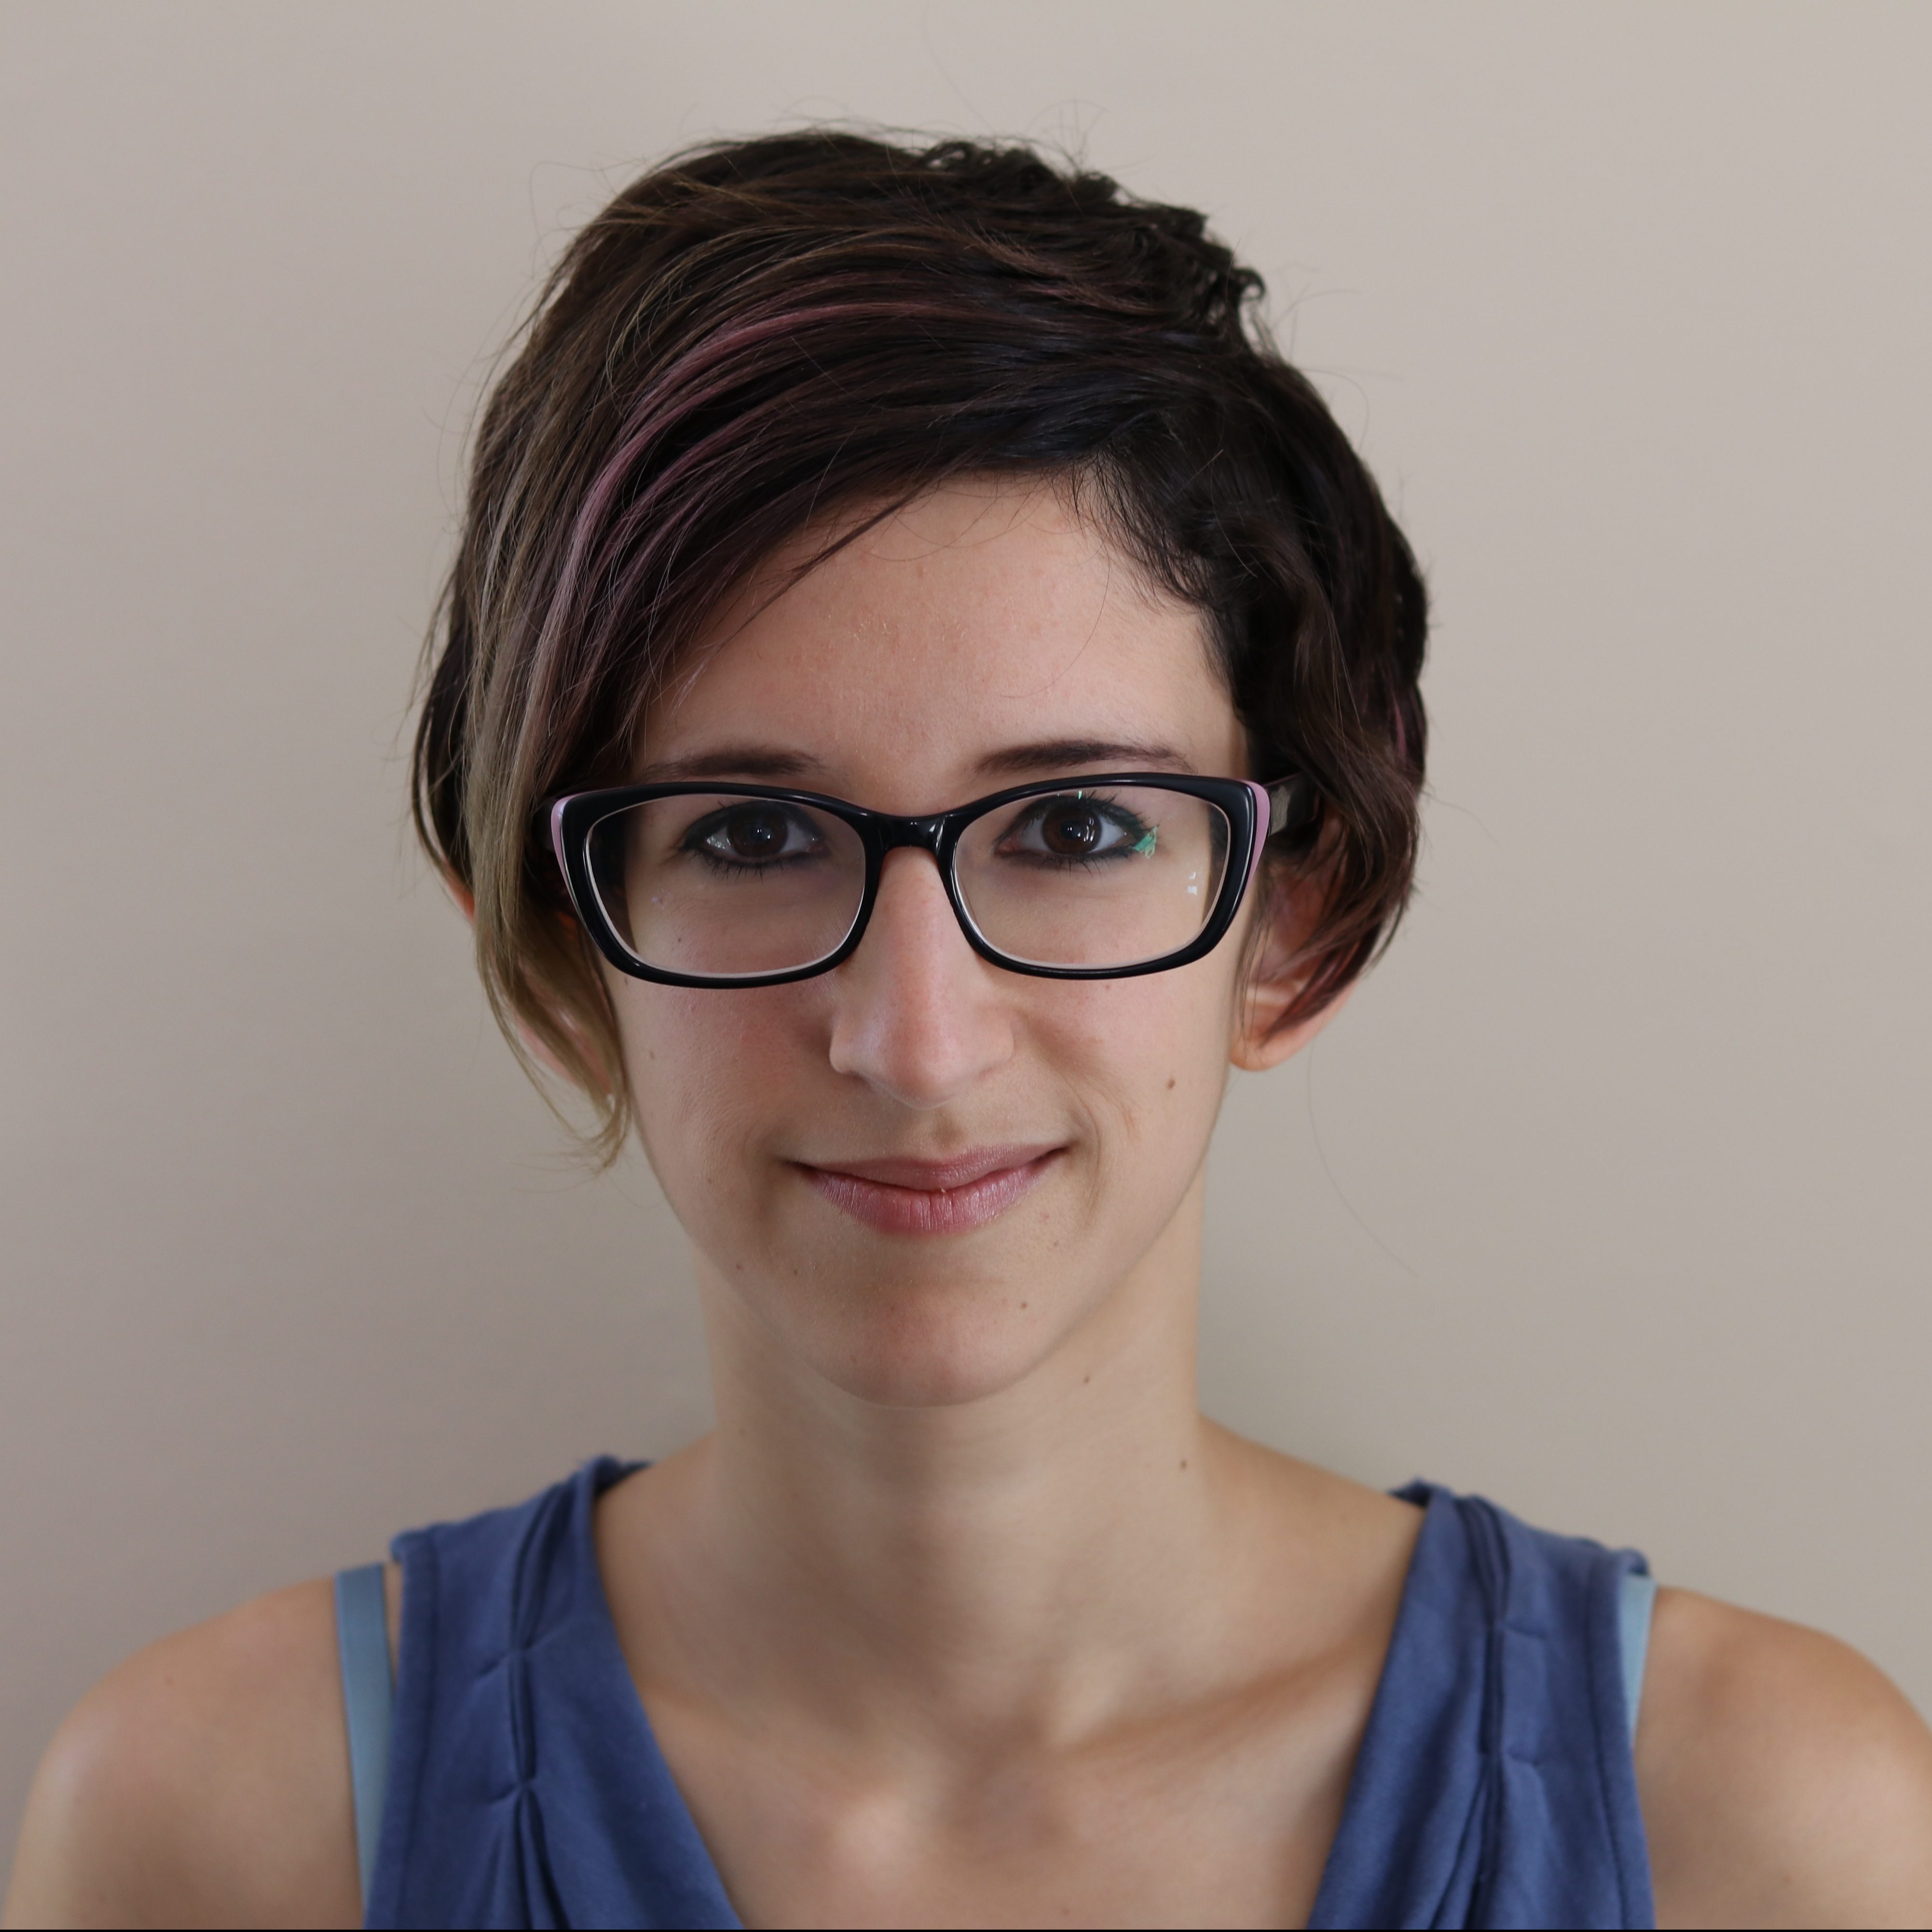 A photo of a person with short hair wearing glasses looking straight into the camera.